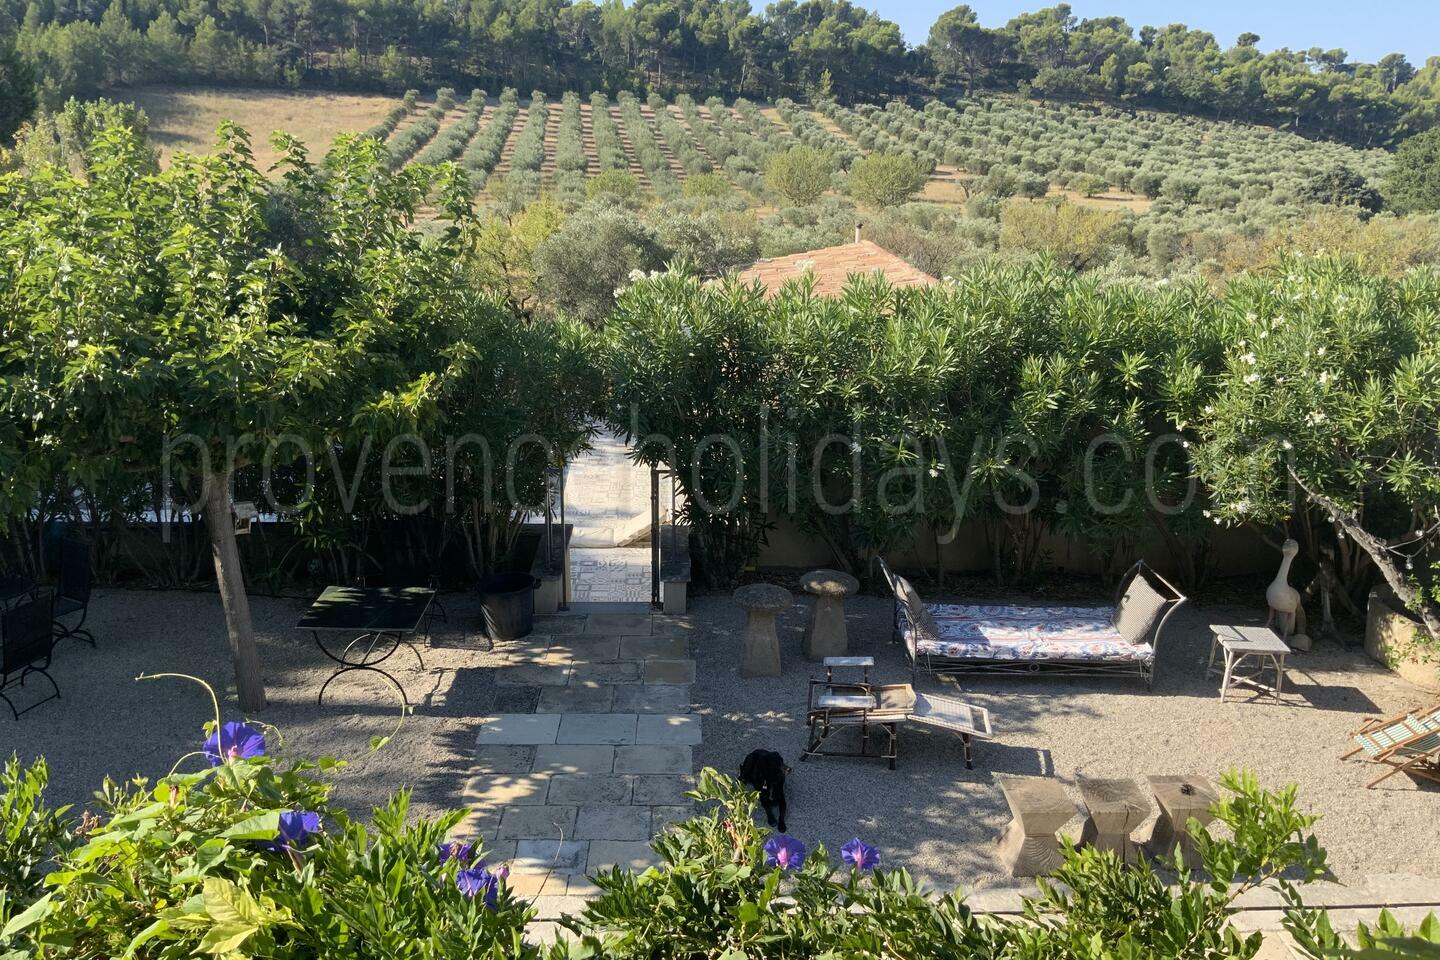 Holiday rental in the Alpilles in Provence -1 - Maison Mouriès: Villa: Exterior